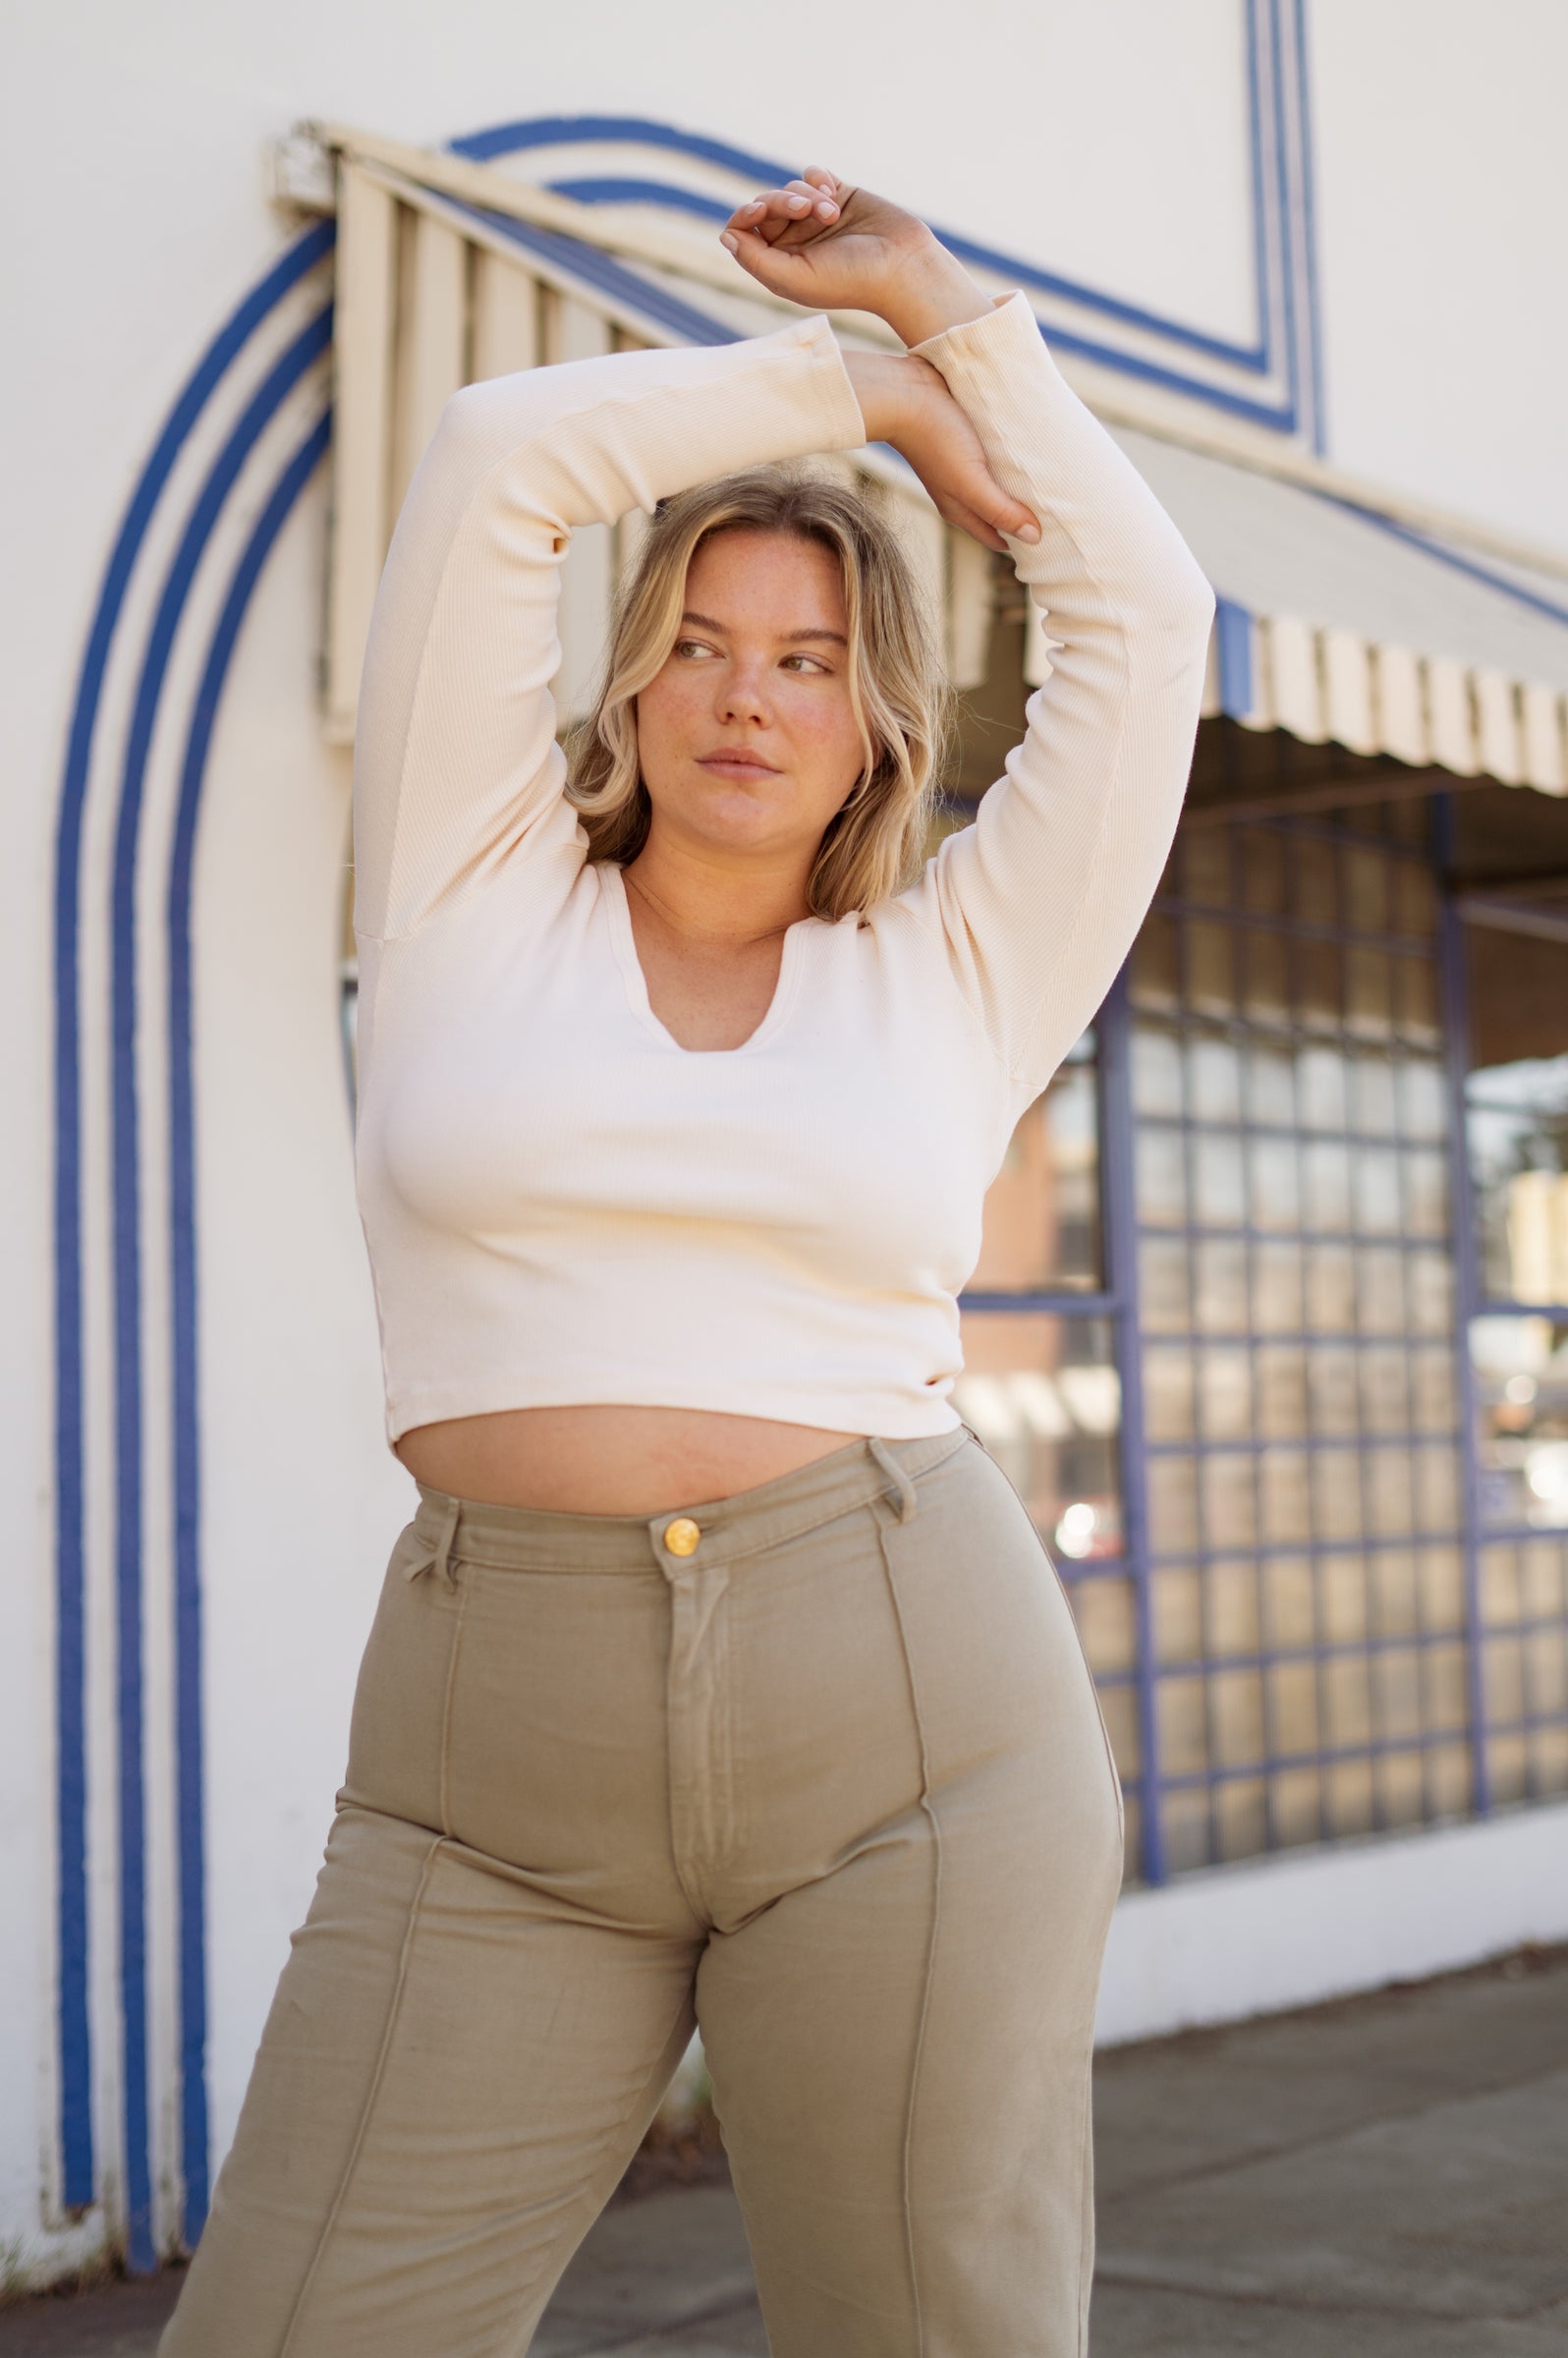 Lish is wearing Long Sleeve V-Neck Tee in Vintage Off-White and Western Pants in Khaki Grey